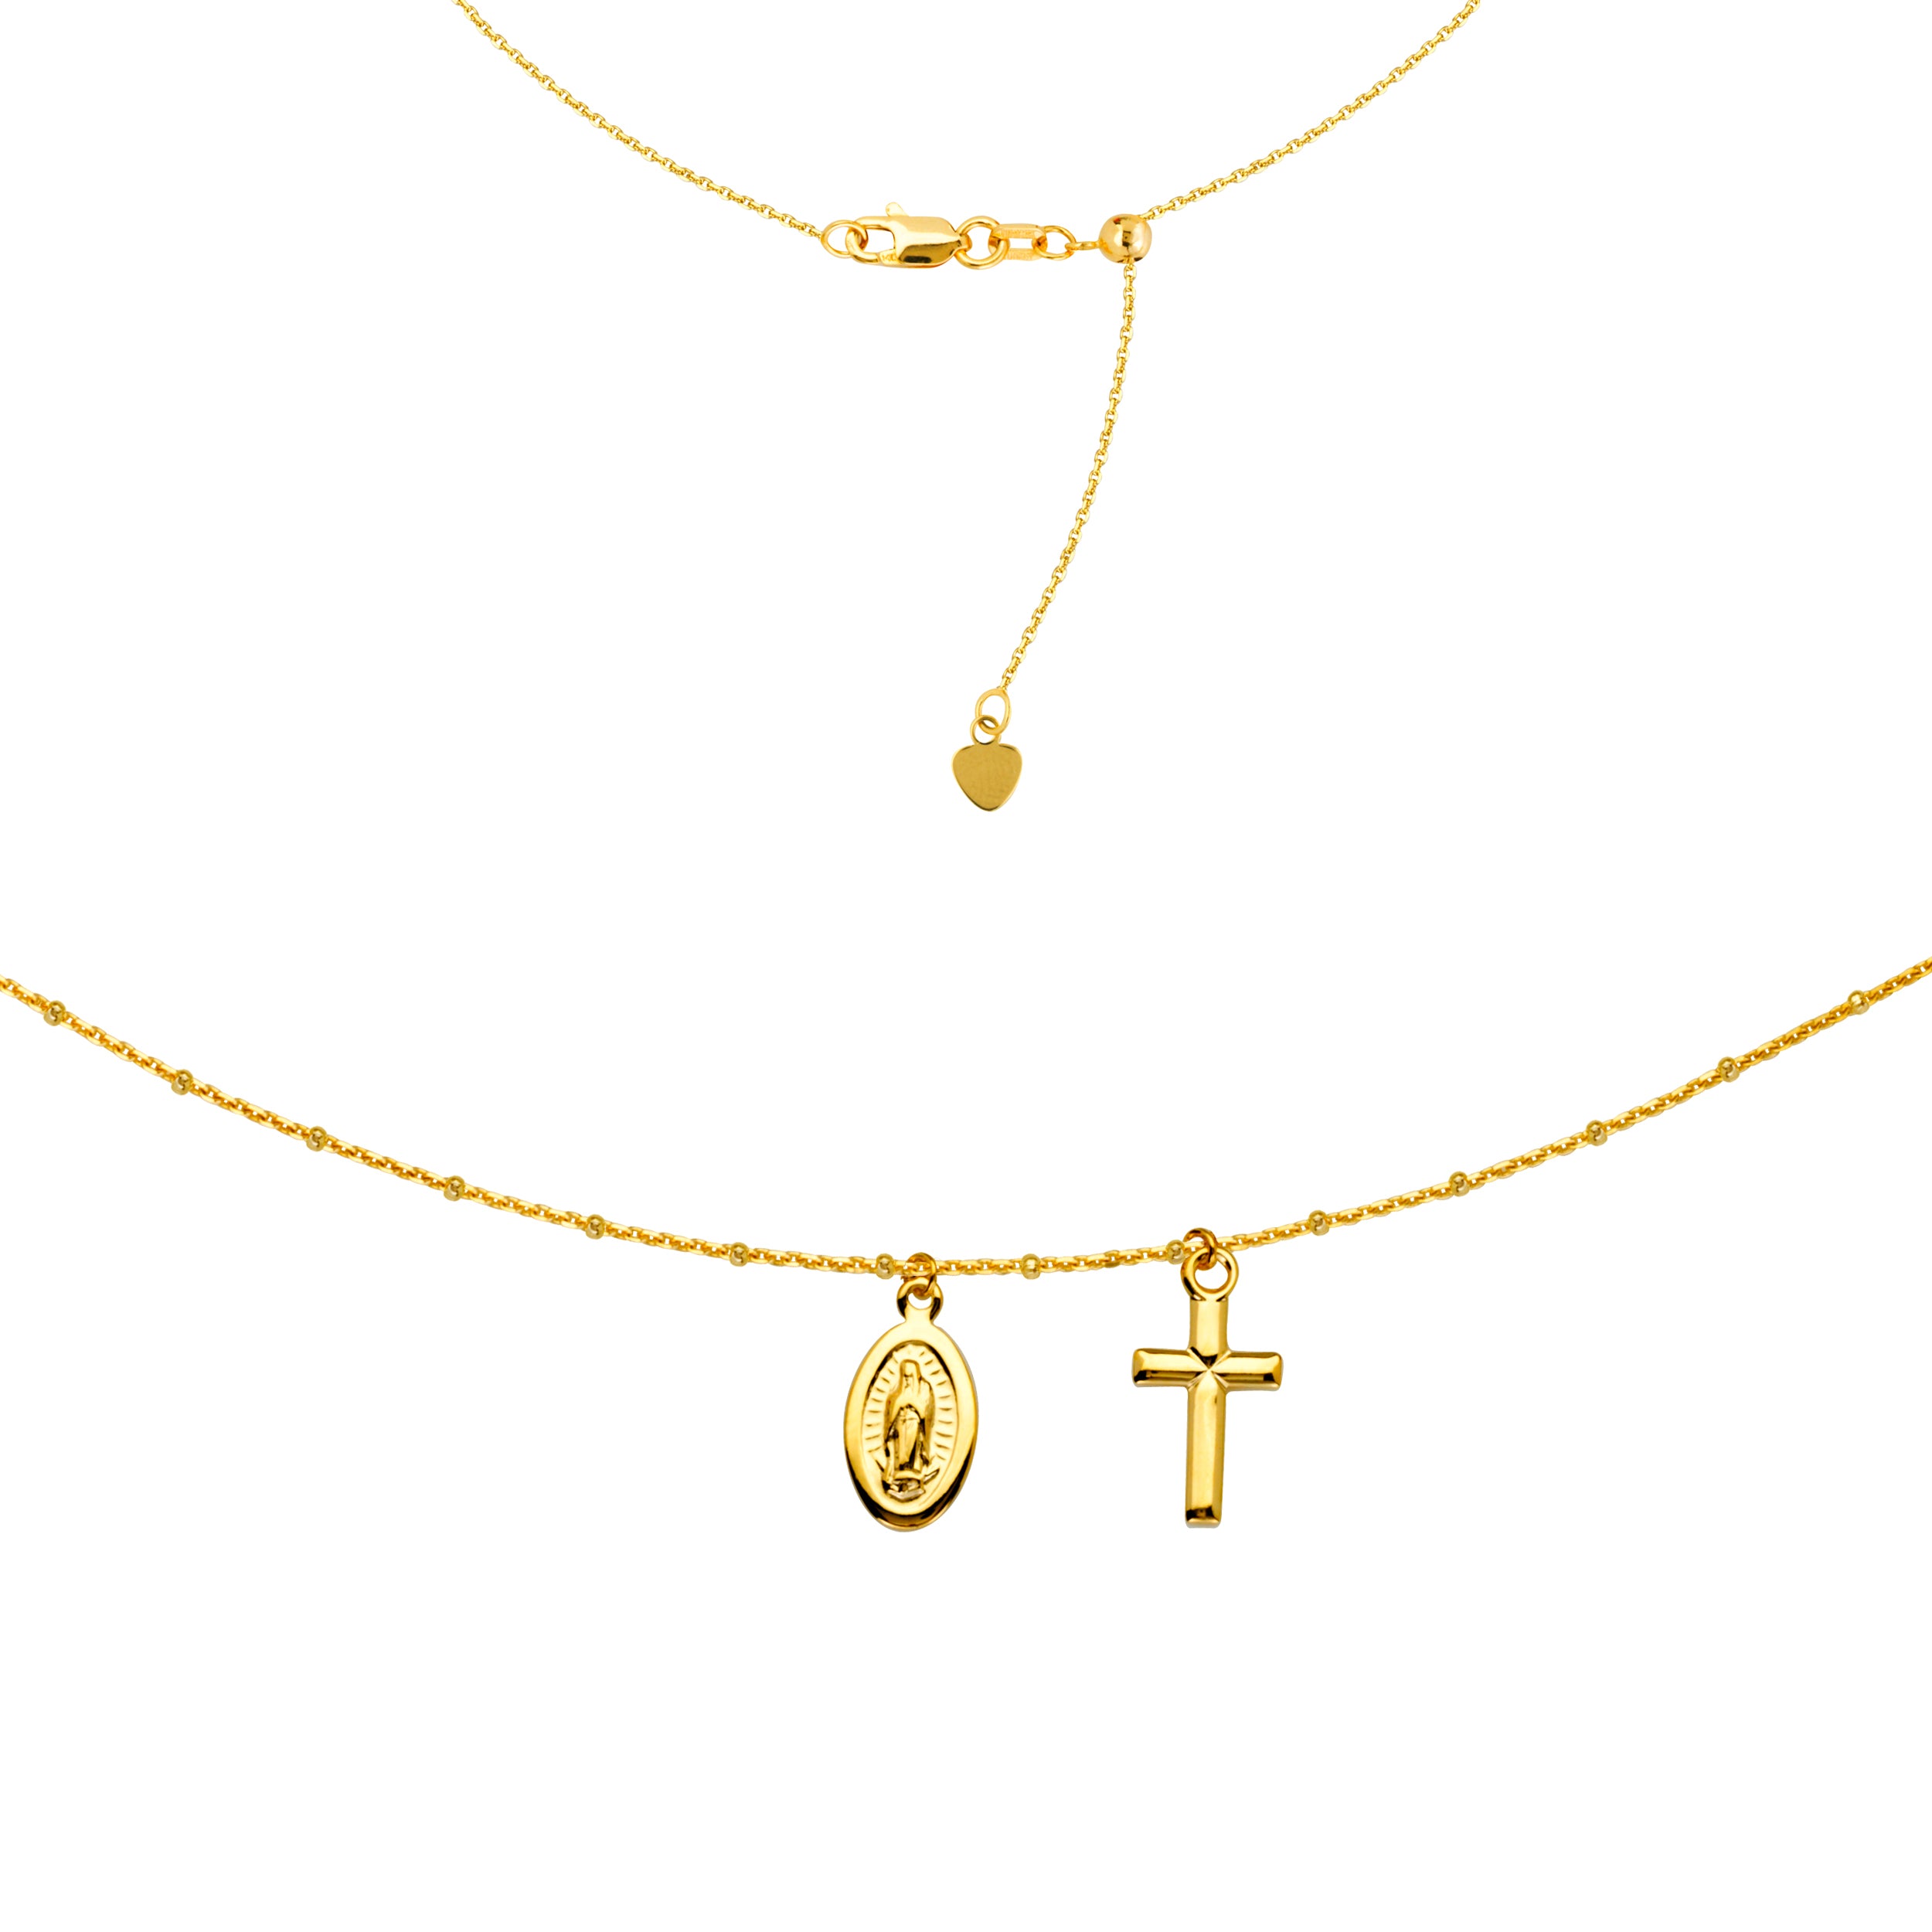 Choker With Dangling Virgin Mary And Cross 14k Yellow Gold Necklace, 16" Adjustable fine designer jewelry for men and women